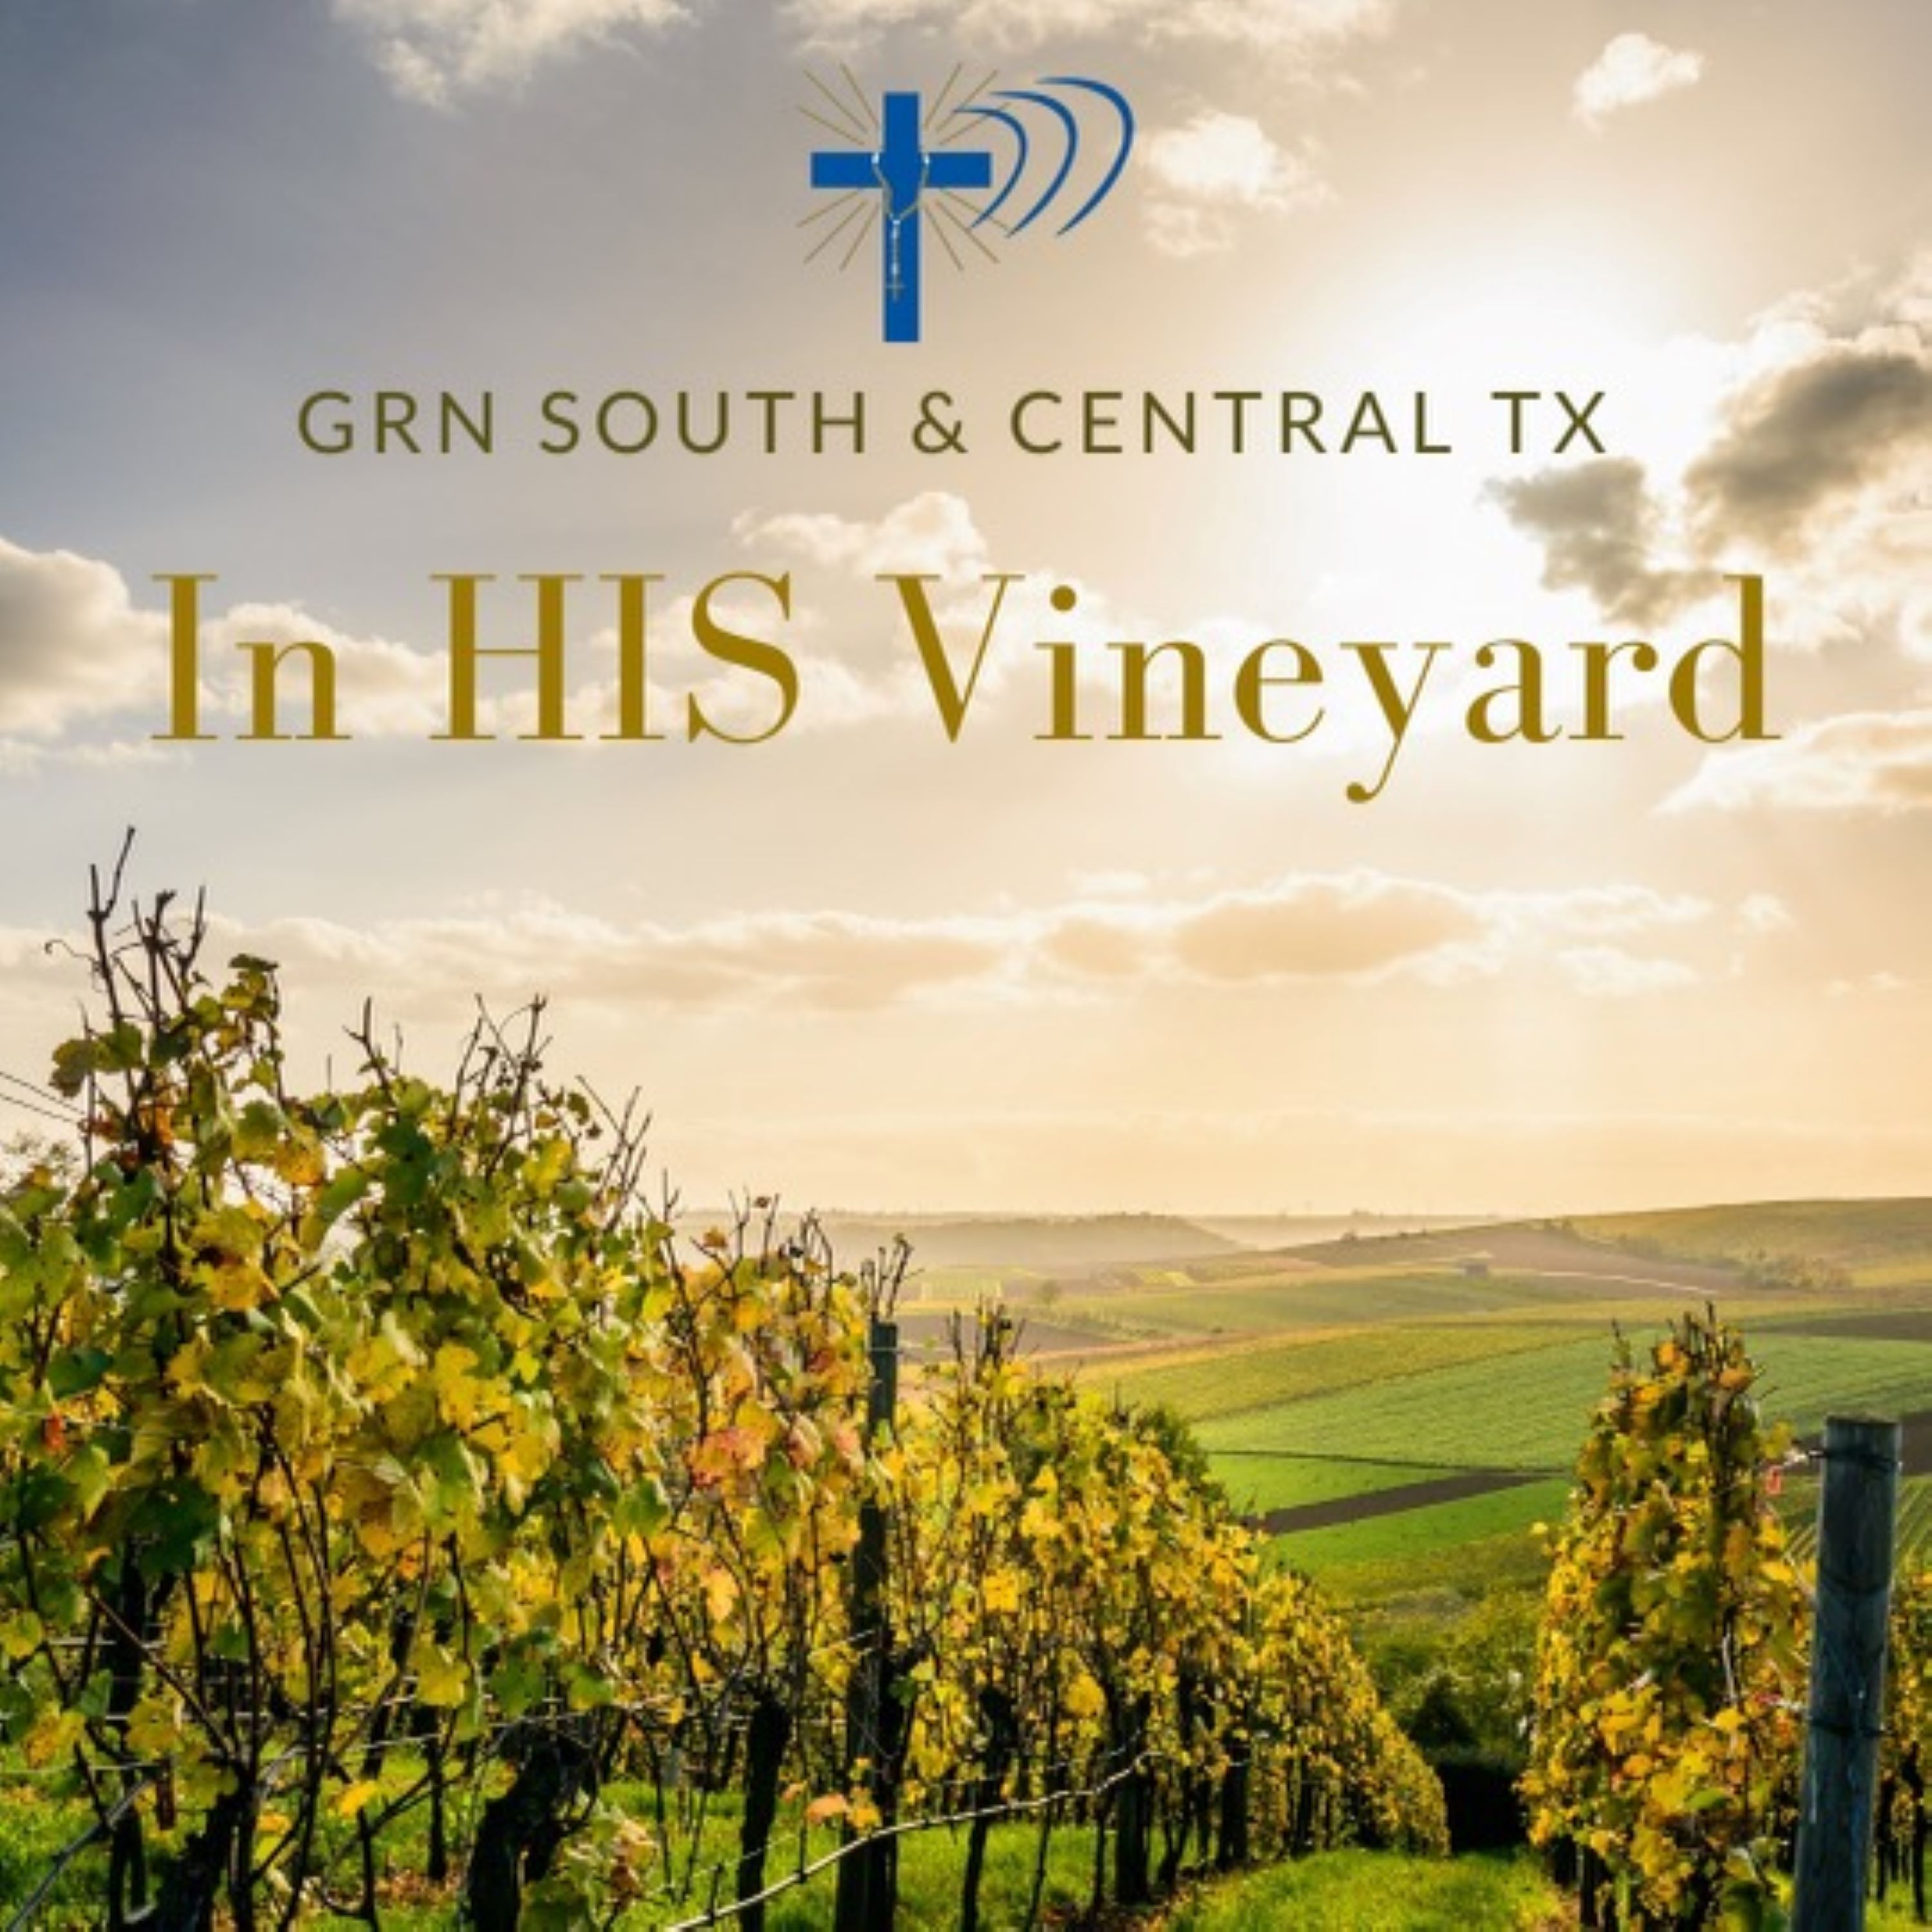 In HIS Vineyard - Monday February 13, 2023